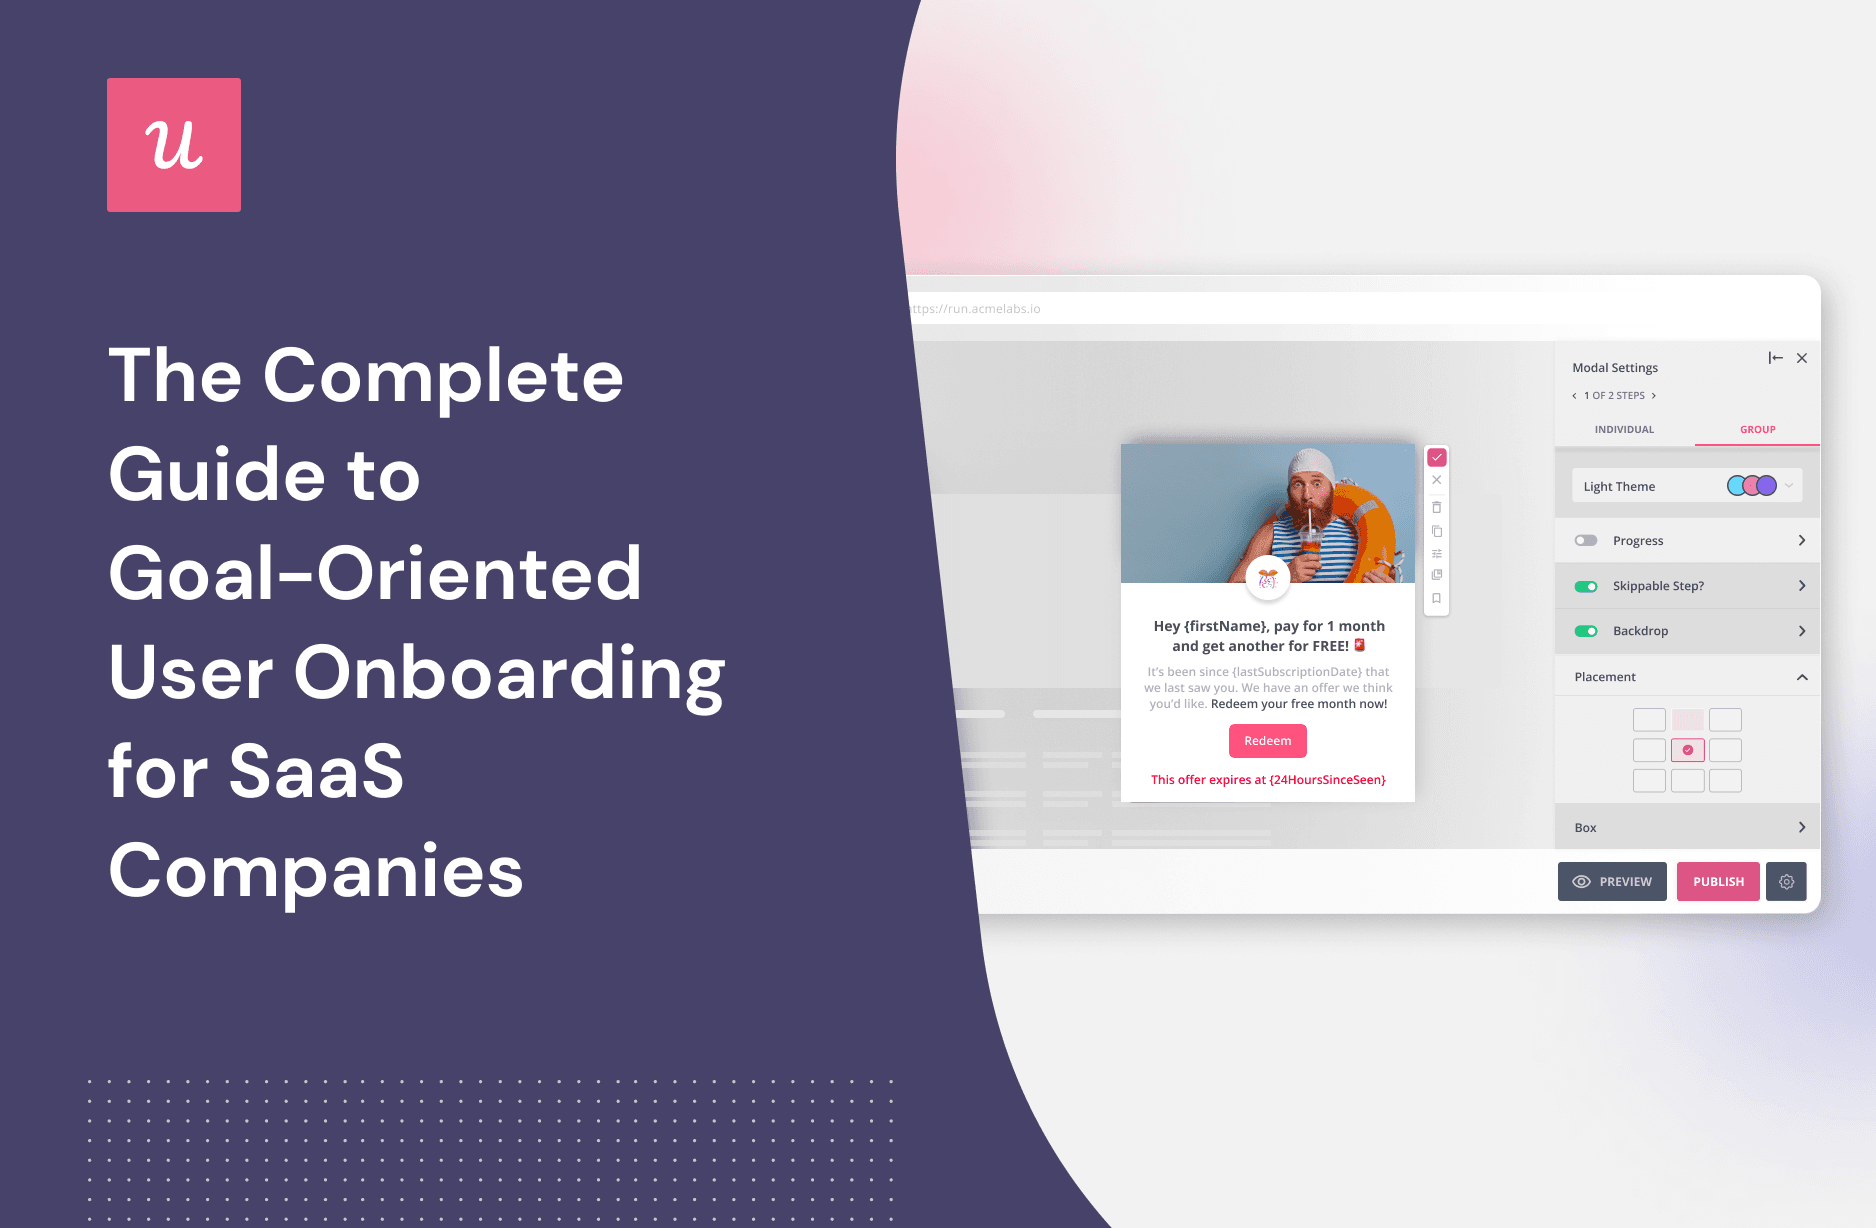 The Complete Guide to Goal-Oriented User Onboarding for SaaS Companies cover